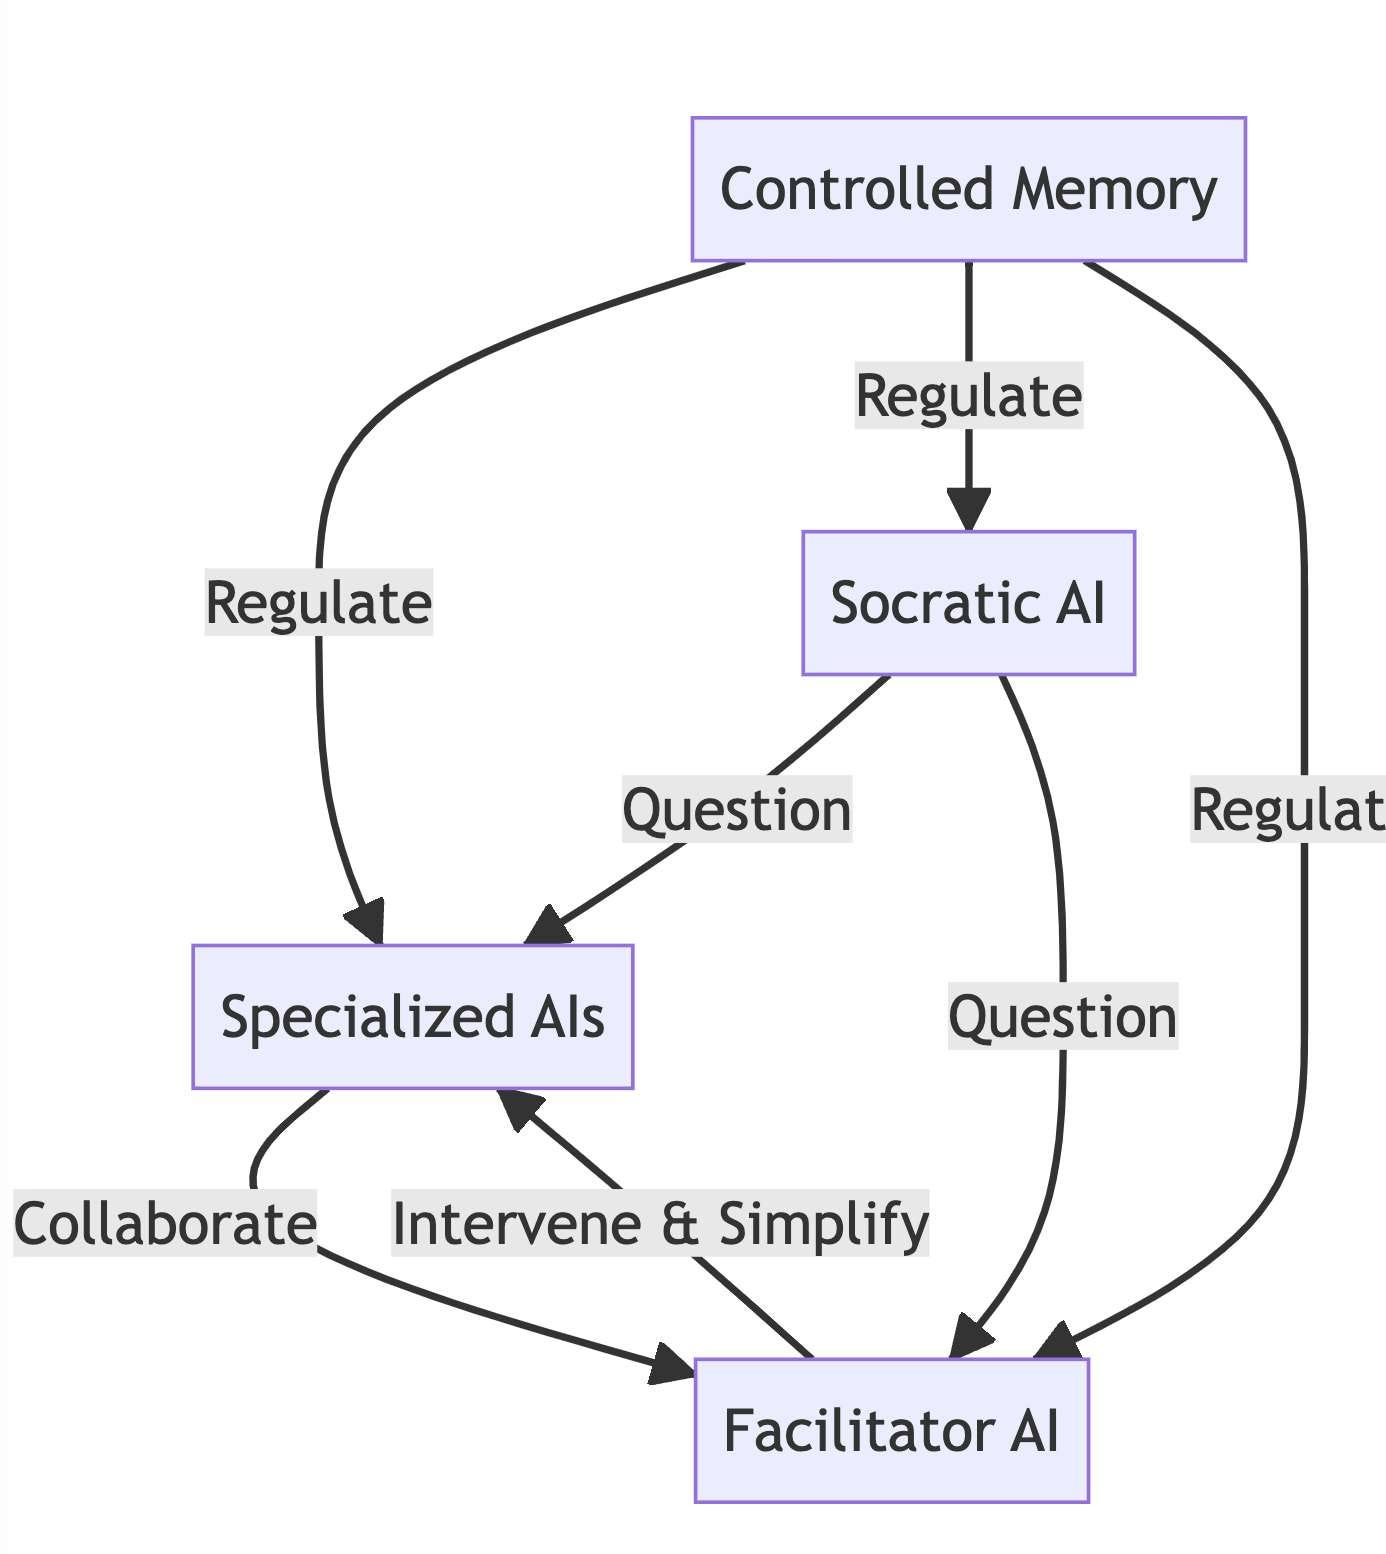 Flowchart depicting the interactions within the proposed AI architecture. Four main components are illustrated: Specialized AIs, Facilitator AI, Socratic AI, and Controlled Memory. The Specialized AIs collaborate under the guidance of the Facilitator AI. The Socratic AI questions both the Specialized AIs and the Facilitator AI, fostering critical thinking. The Controlled Memory regulates all three AI types to ensure they remain contextually aware without biases.